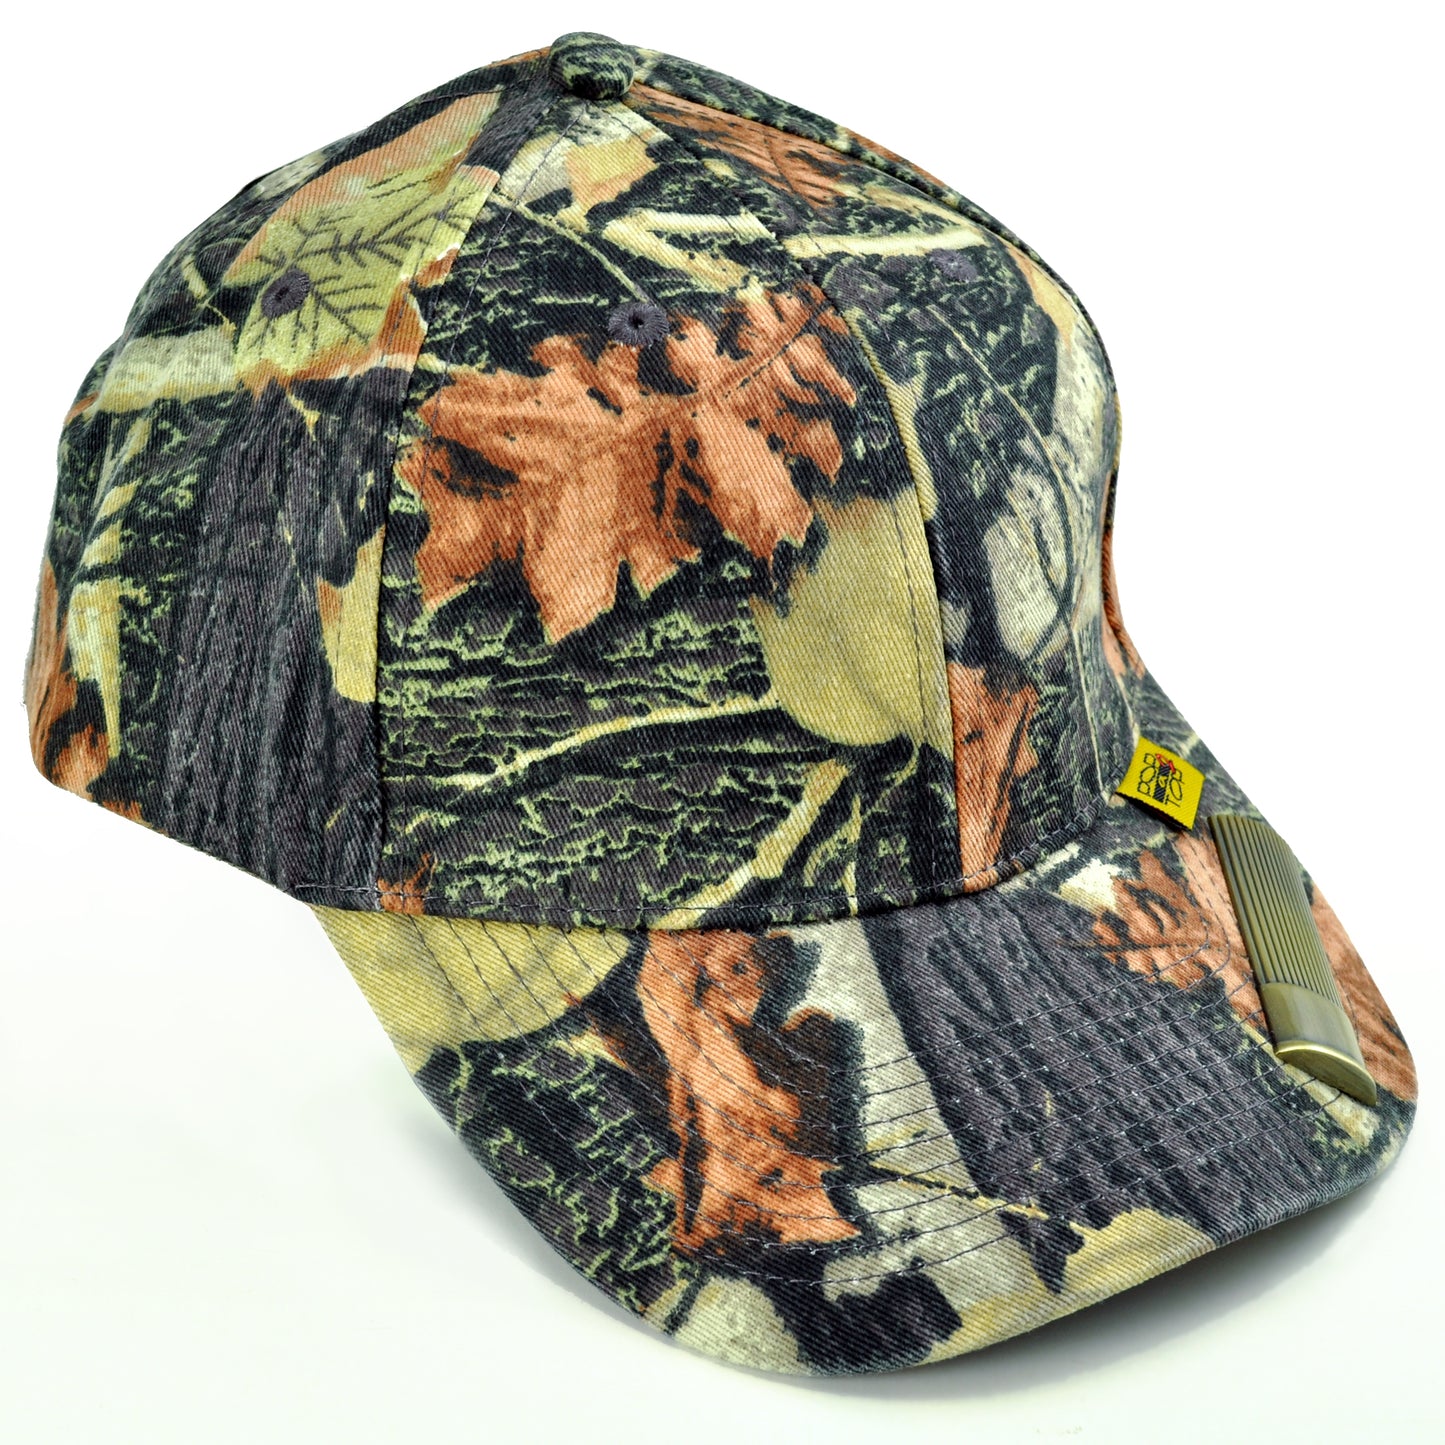 POP-A-TOP Snapback Hat with Bottle Opener Blue Camo